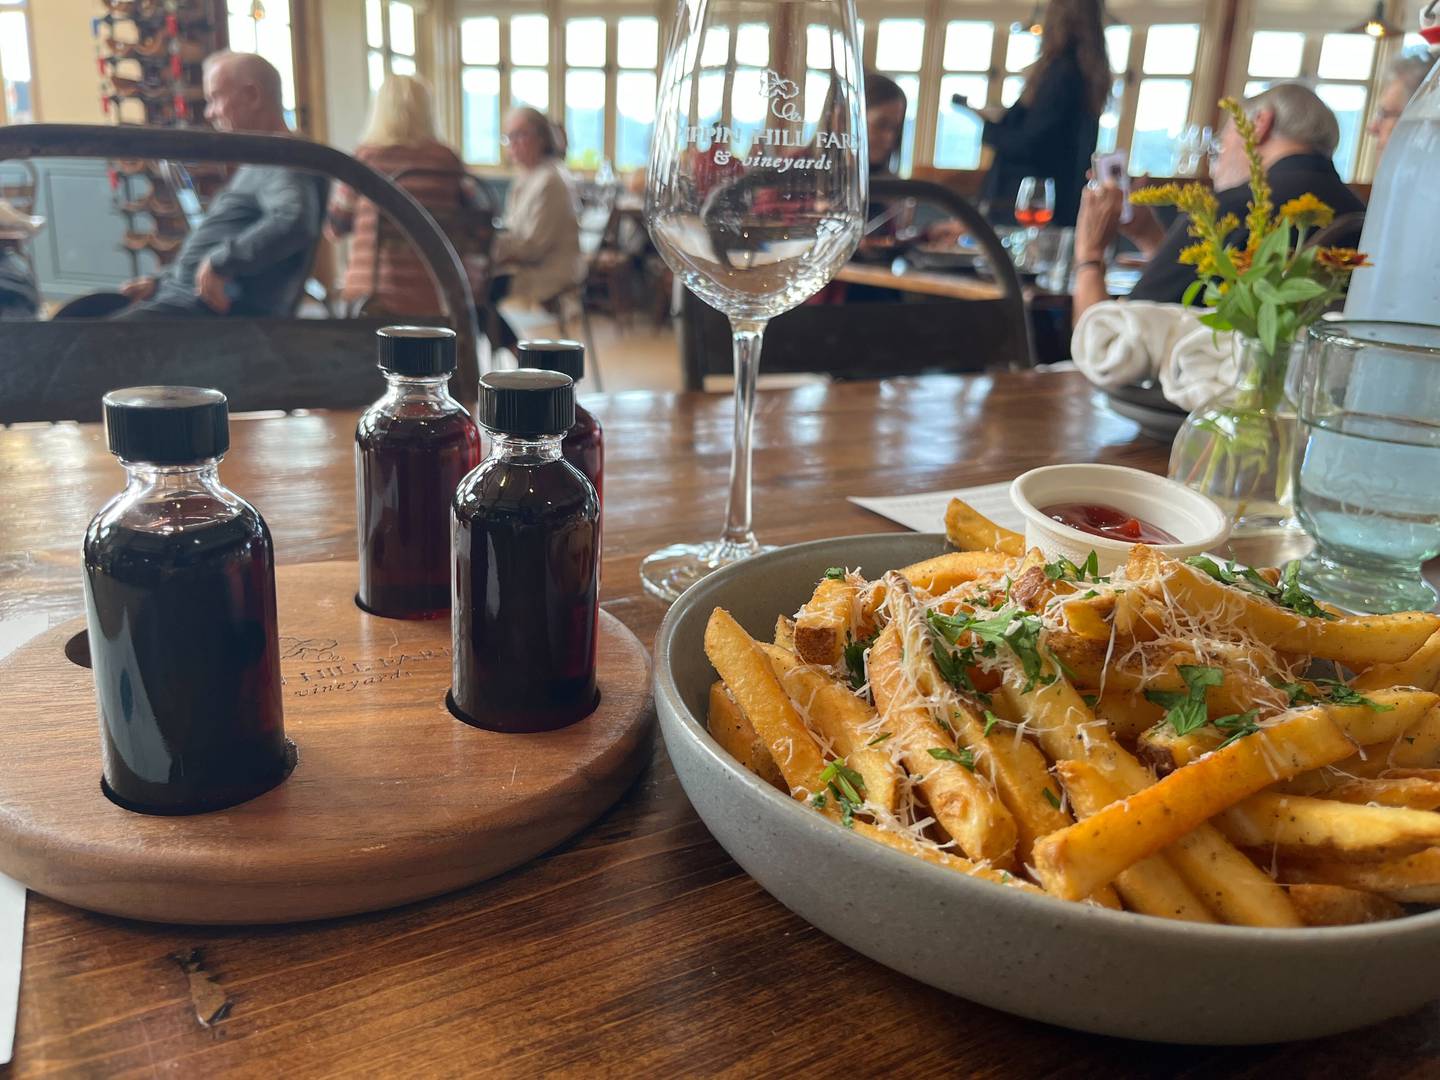 A red wine tasting flight and parmesan fries with herbs are just a few of the items on the menu at Pippin Hill Farm and Vineyards.